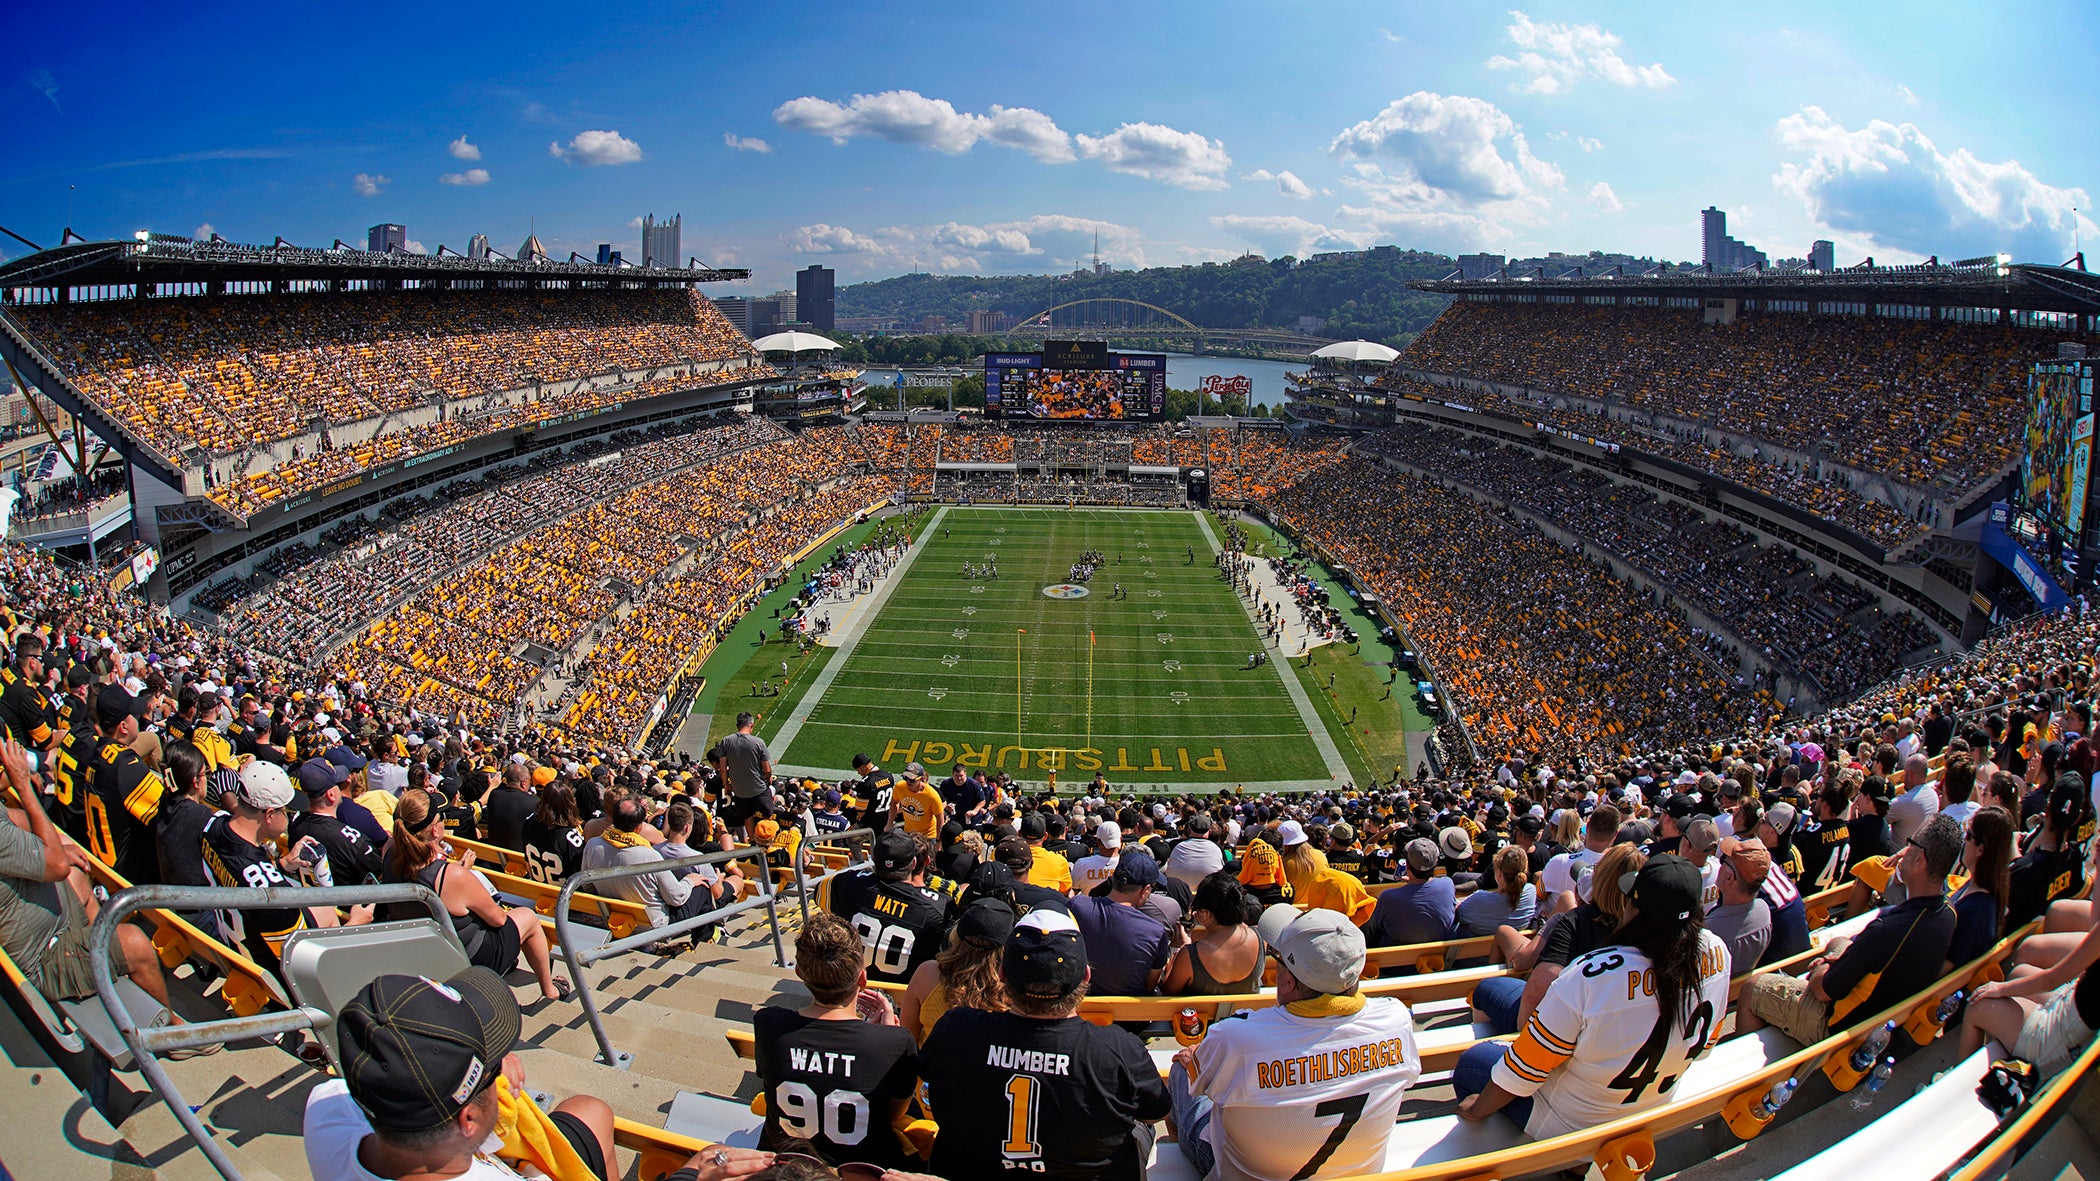 Spectator at Steelers game in Pittsburgh dies after fall from escalator -  The Boston Globe